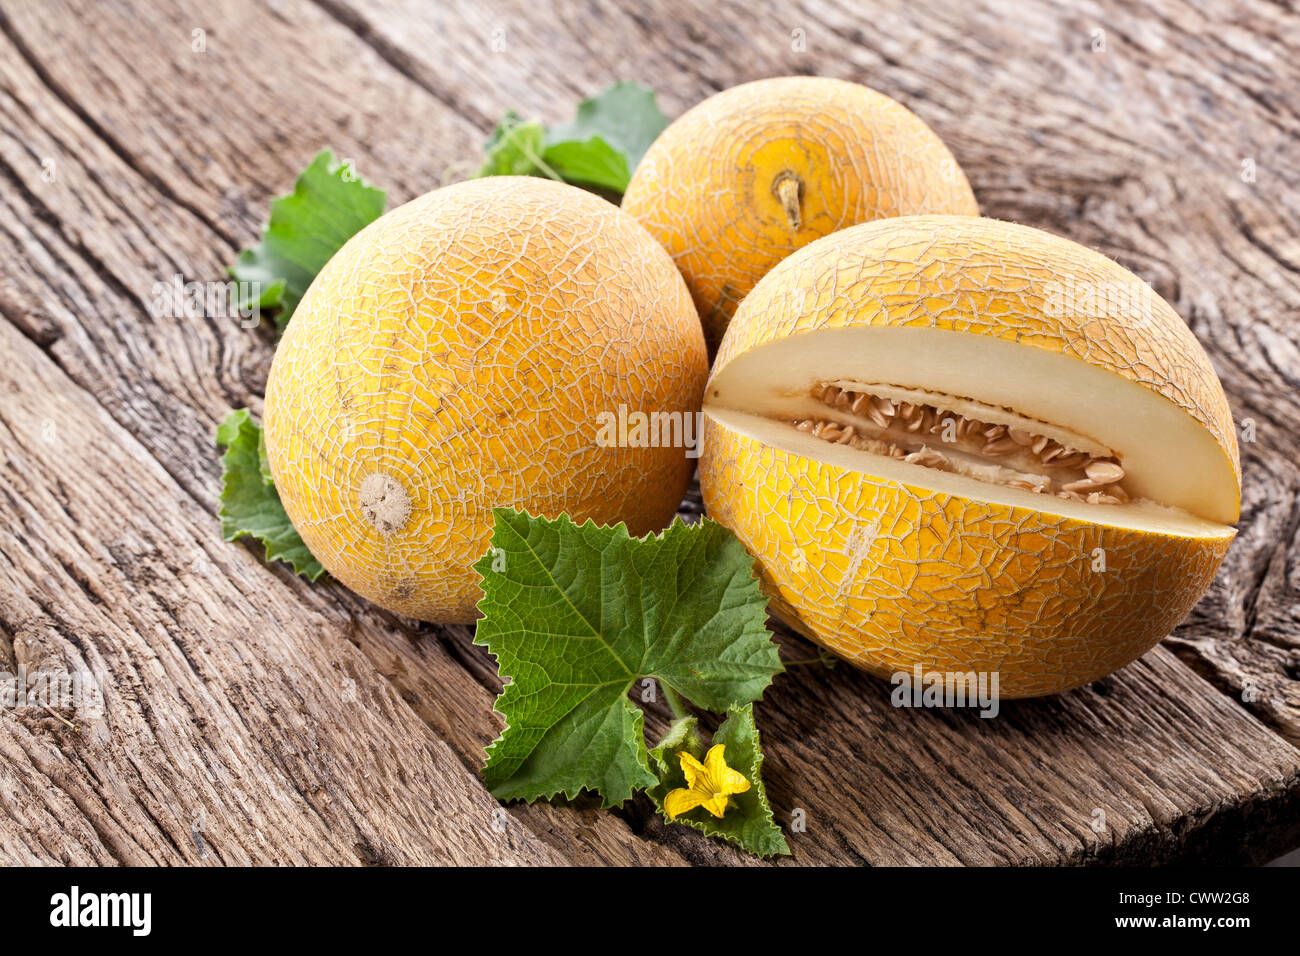 Melon with slices and leaves on a old wooden table. Stock Photo